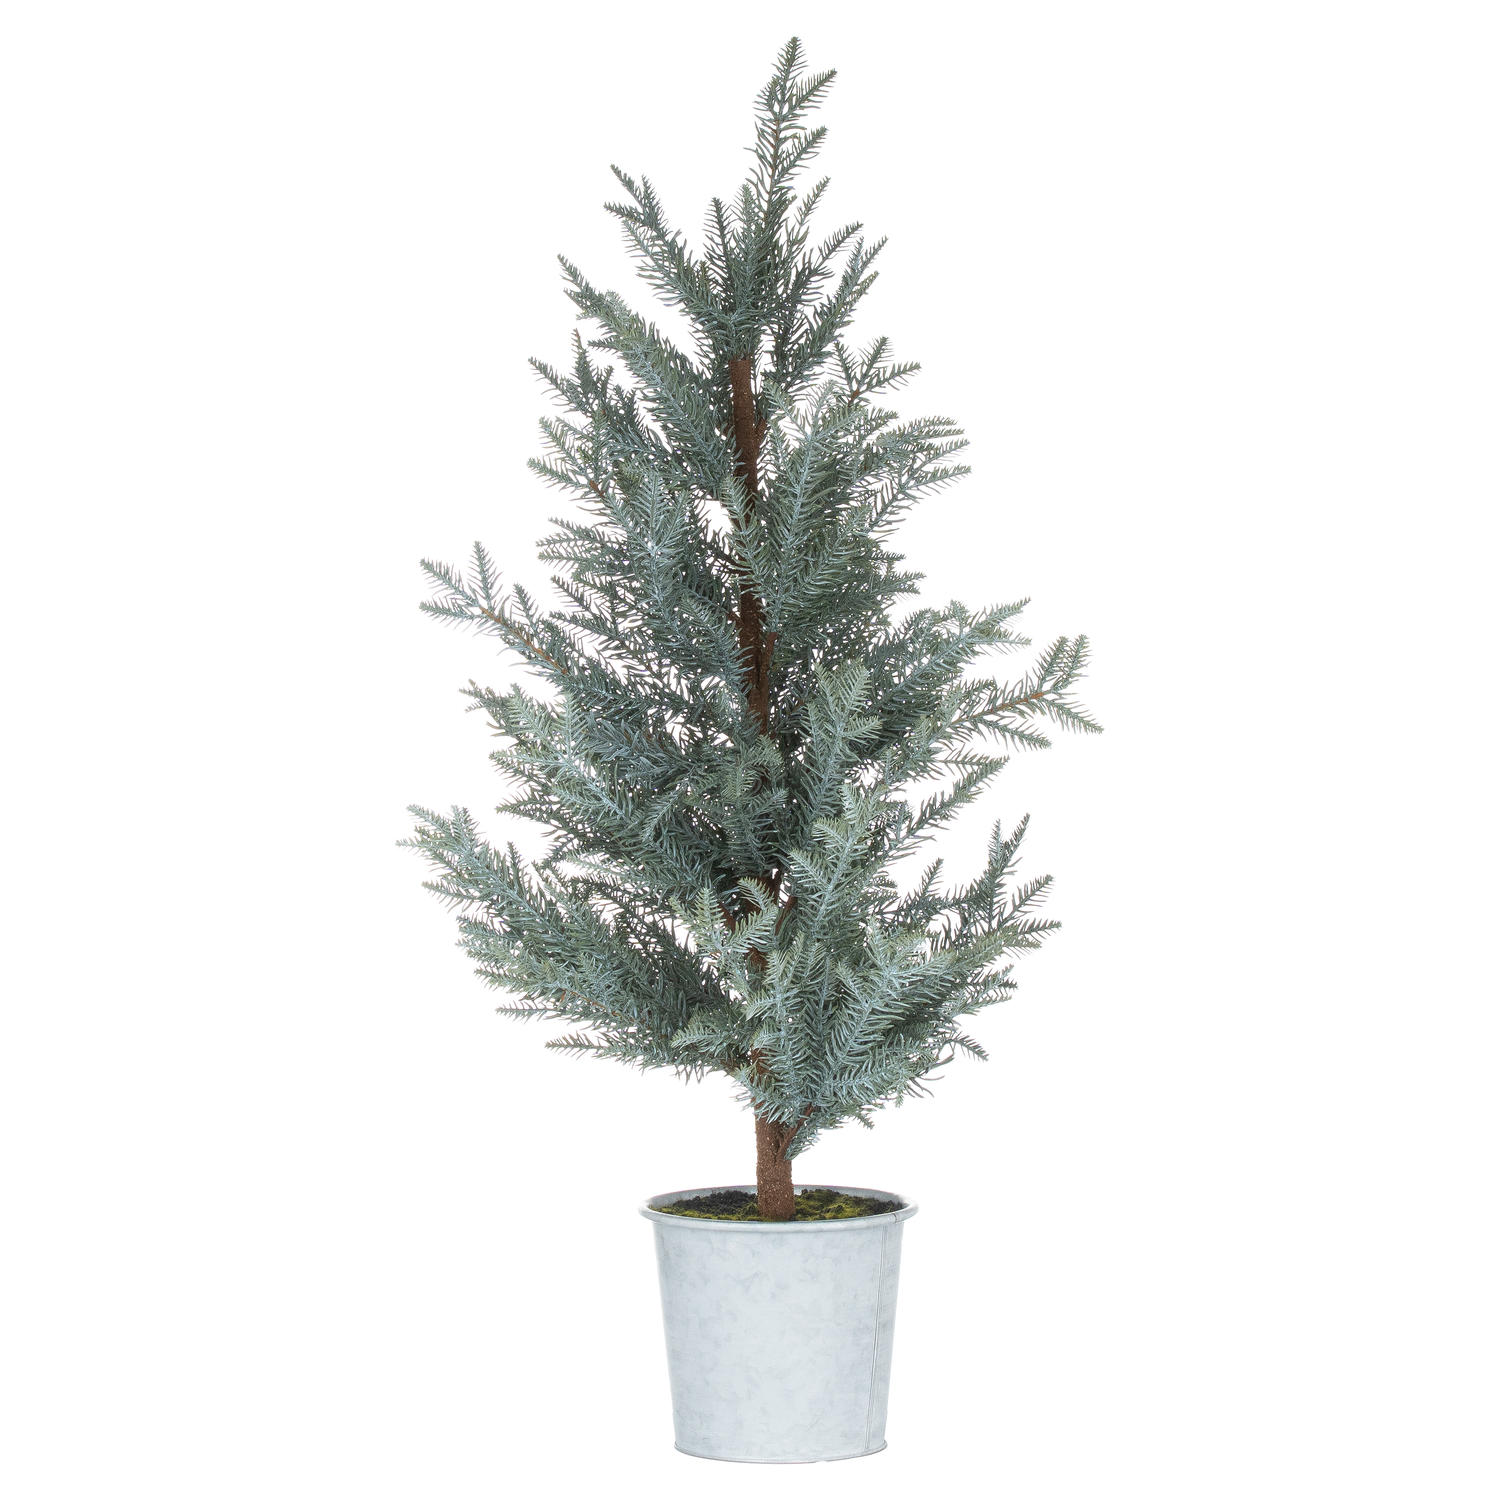 Tall Christmas Fir Tree In Stone - Image 1